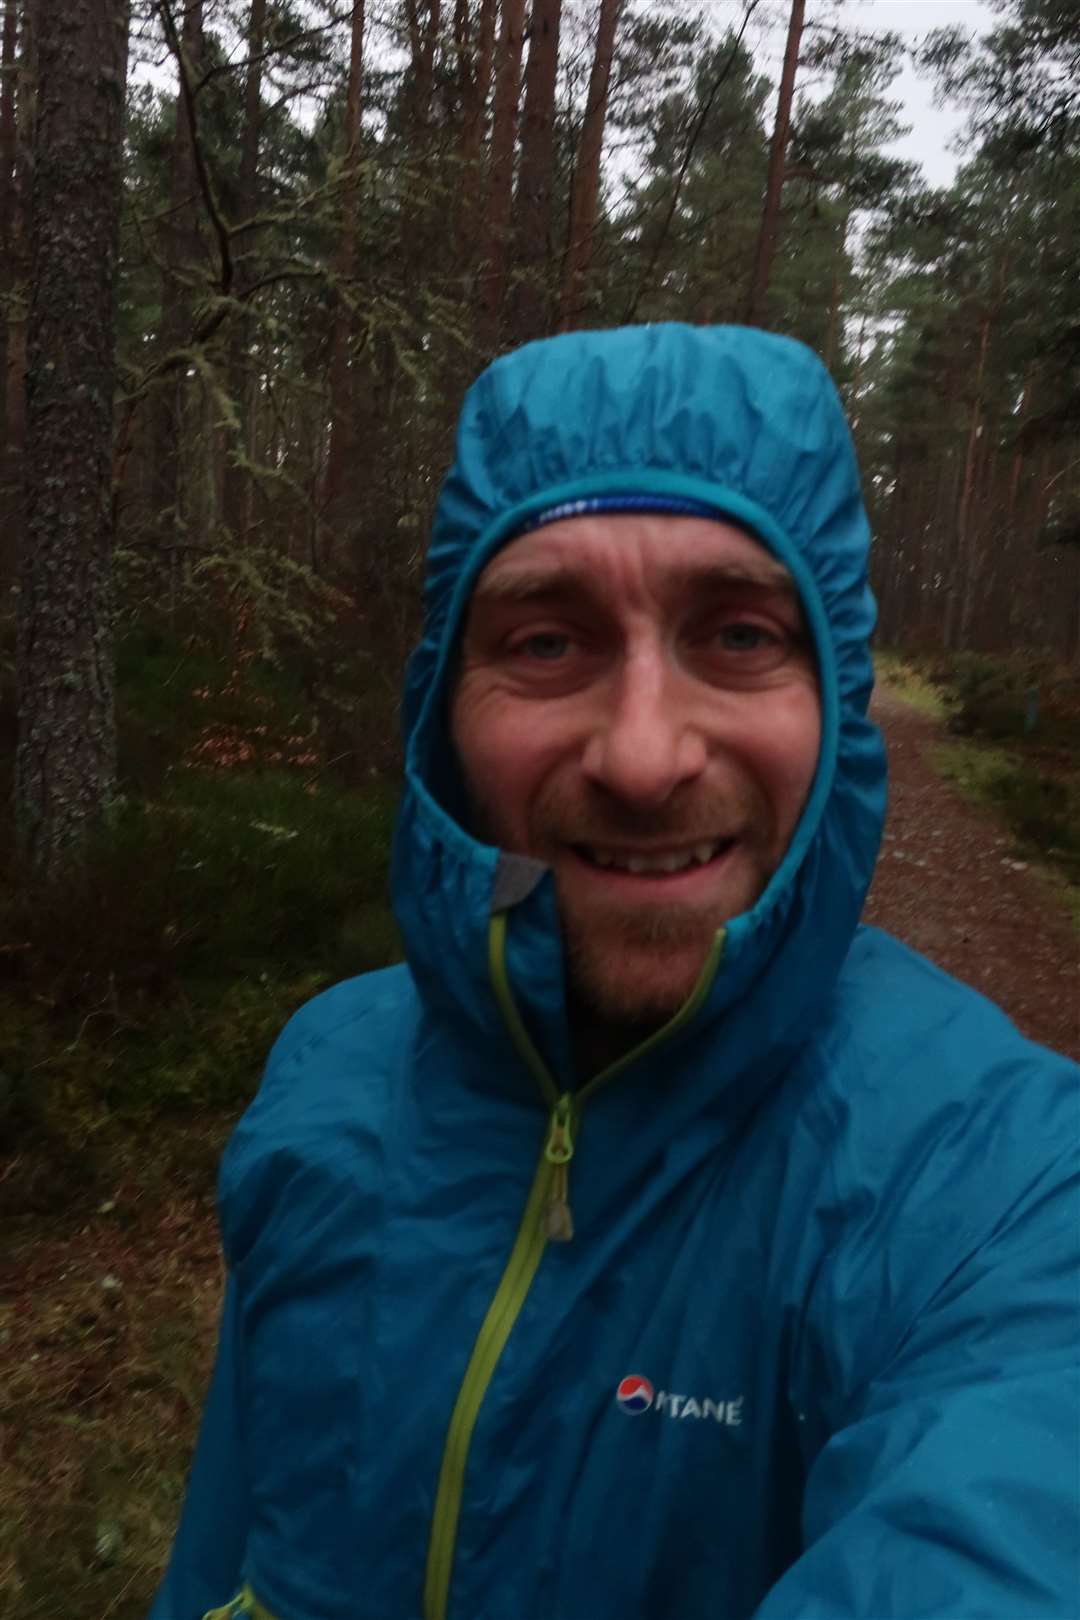 John enjoys a run in the rain just before the restrictions kicked in.